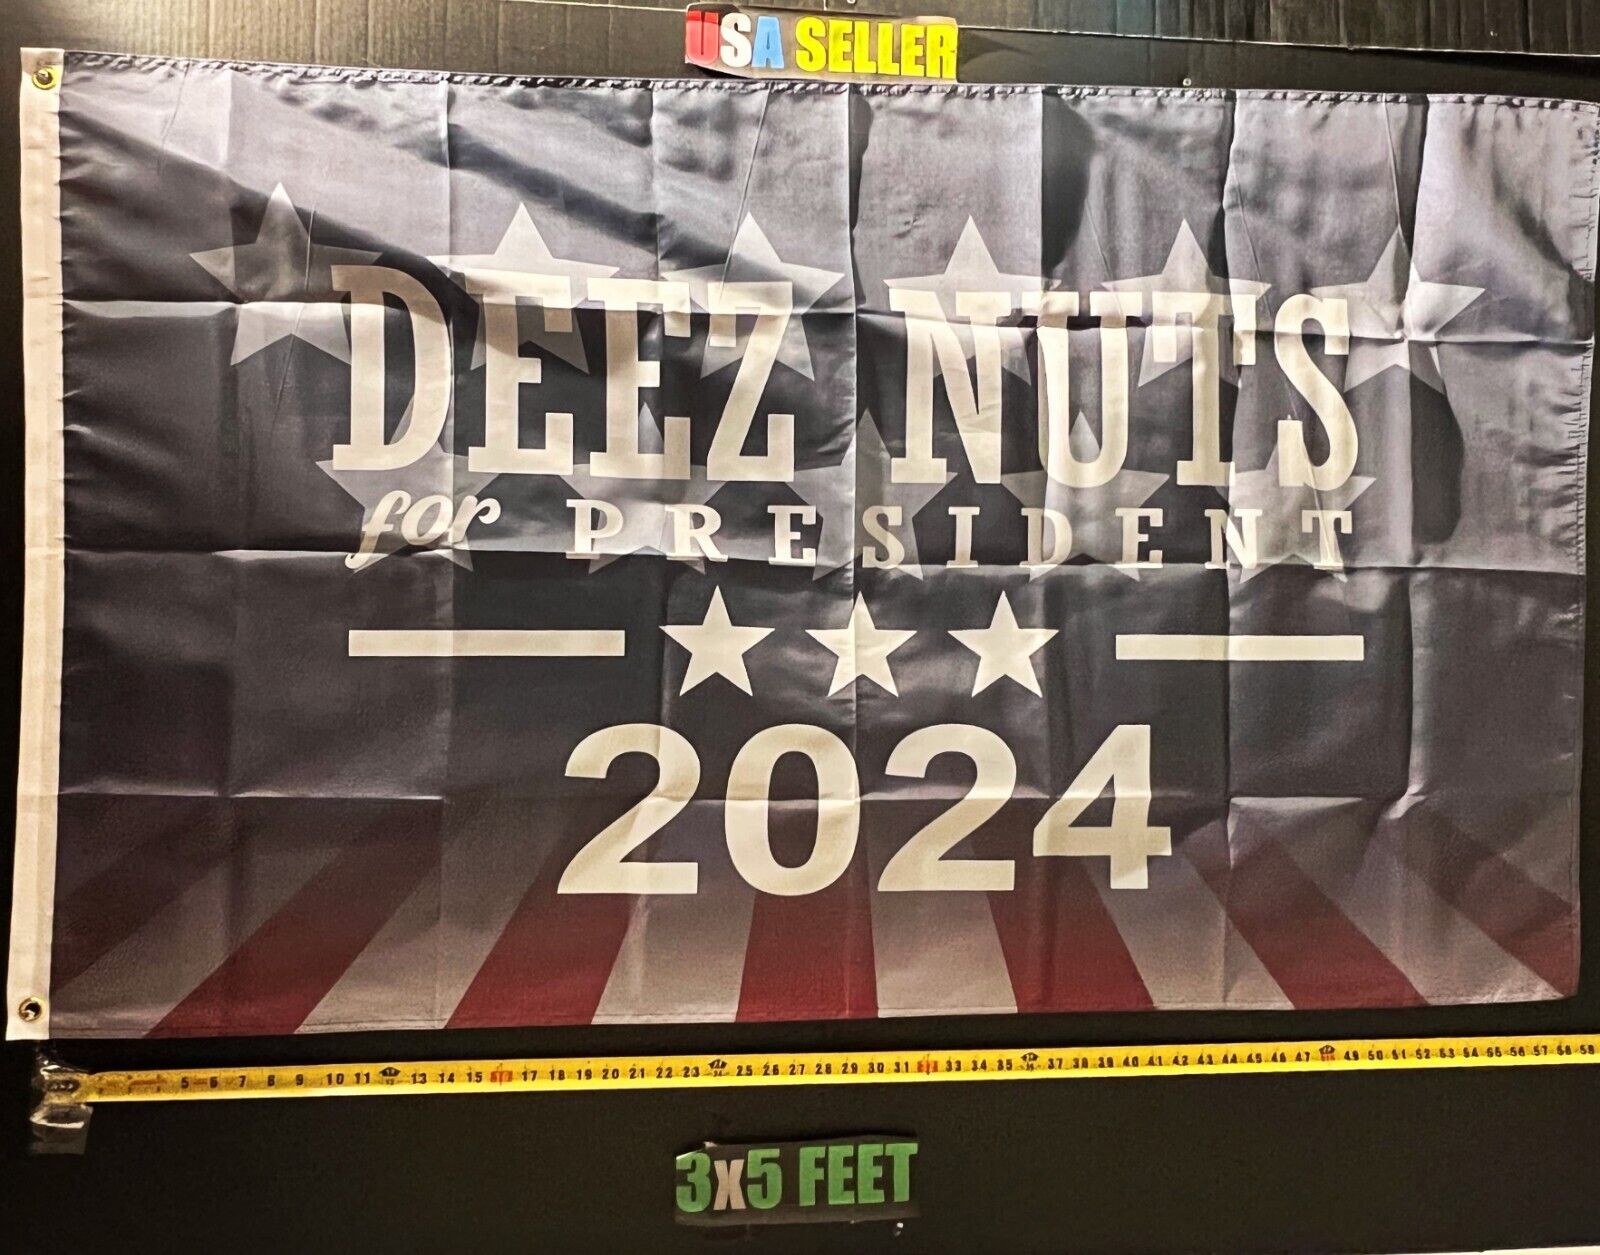 Send Nudes Flag  Deez Nuts 2024 USA Busch Claw Beer Pong Sign 3x5\'